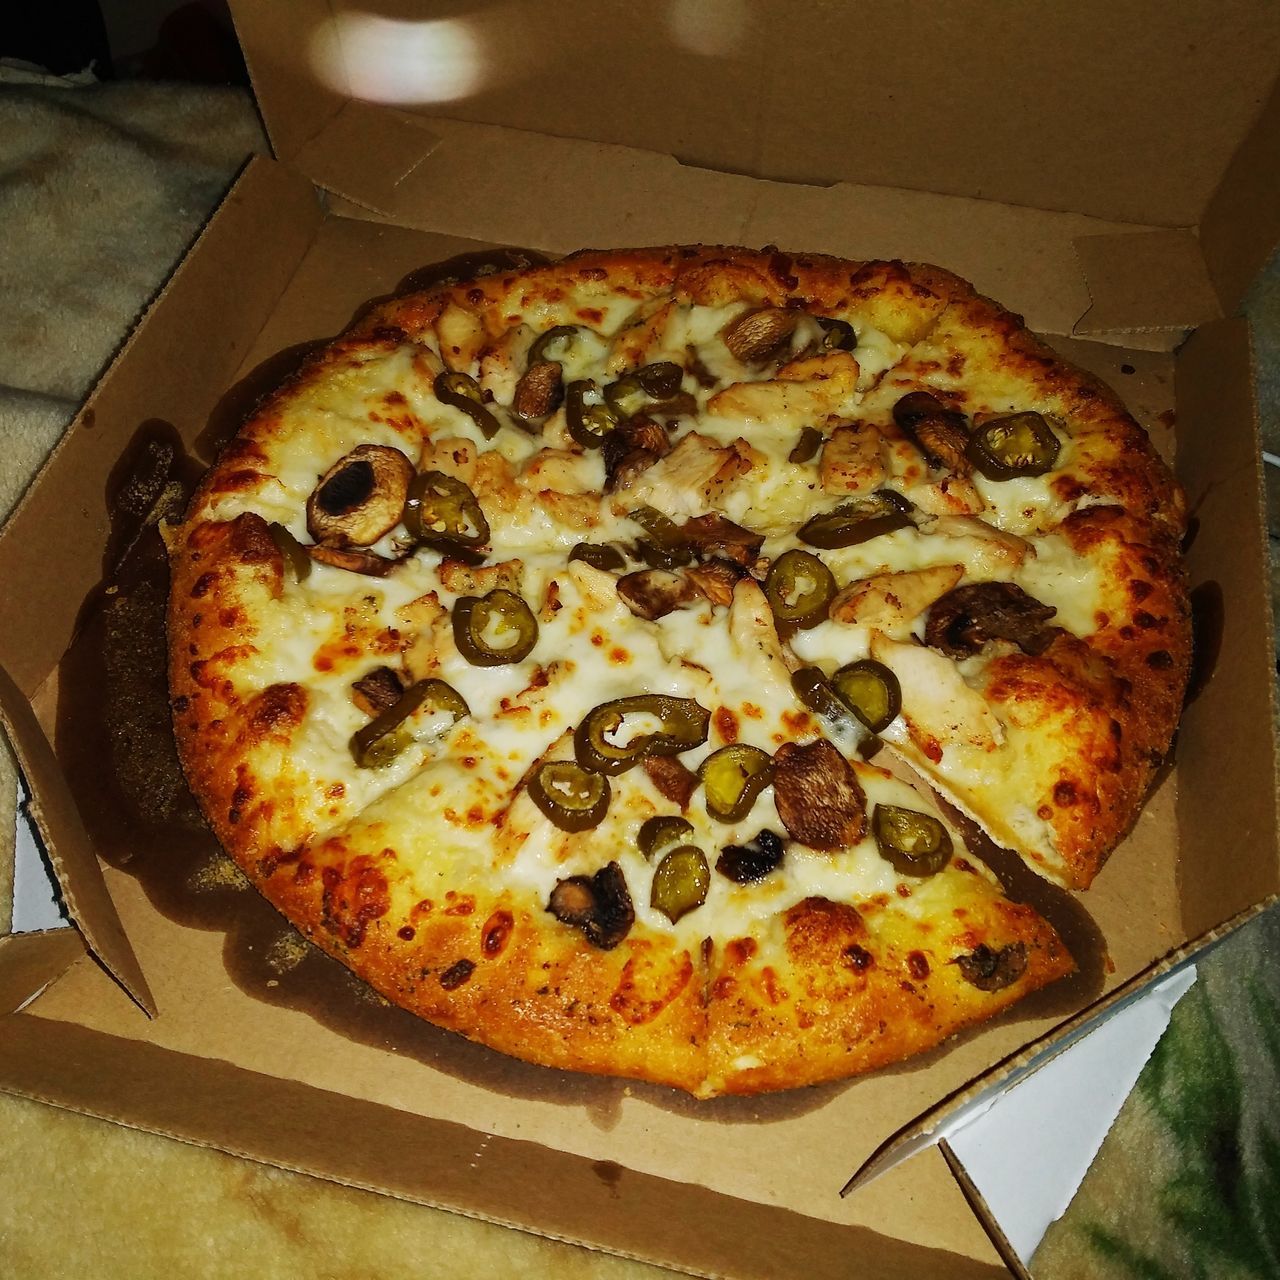 CLOSE-UP OF PIZZA IN BOX